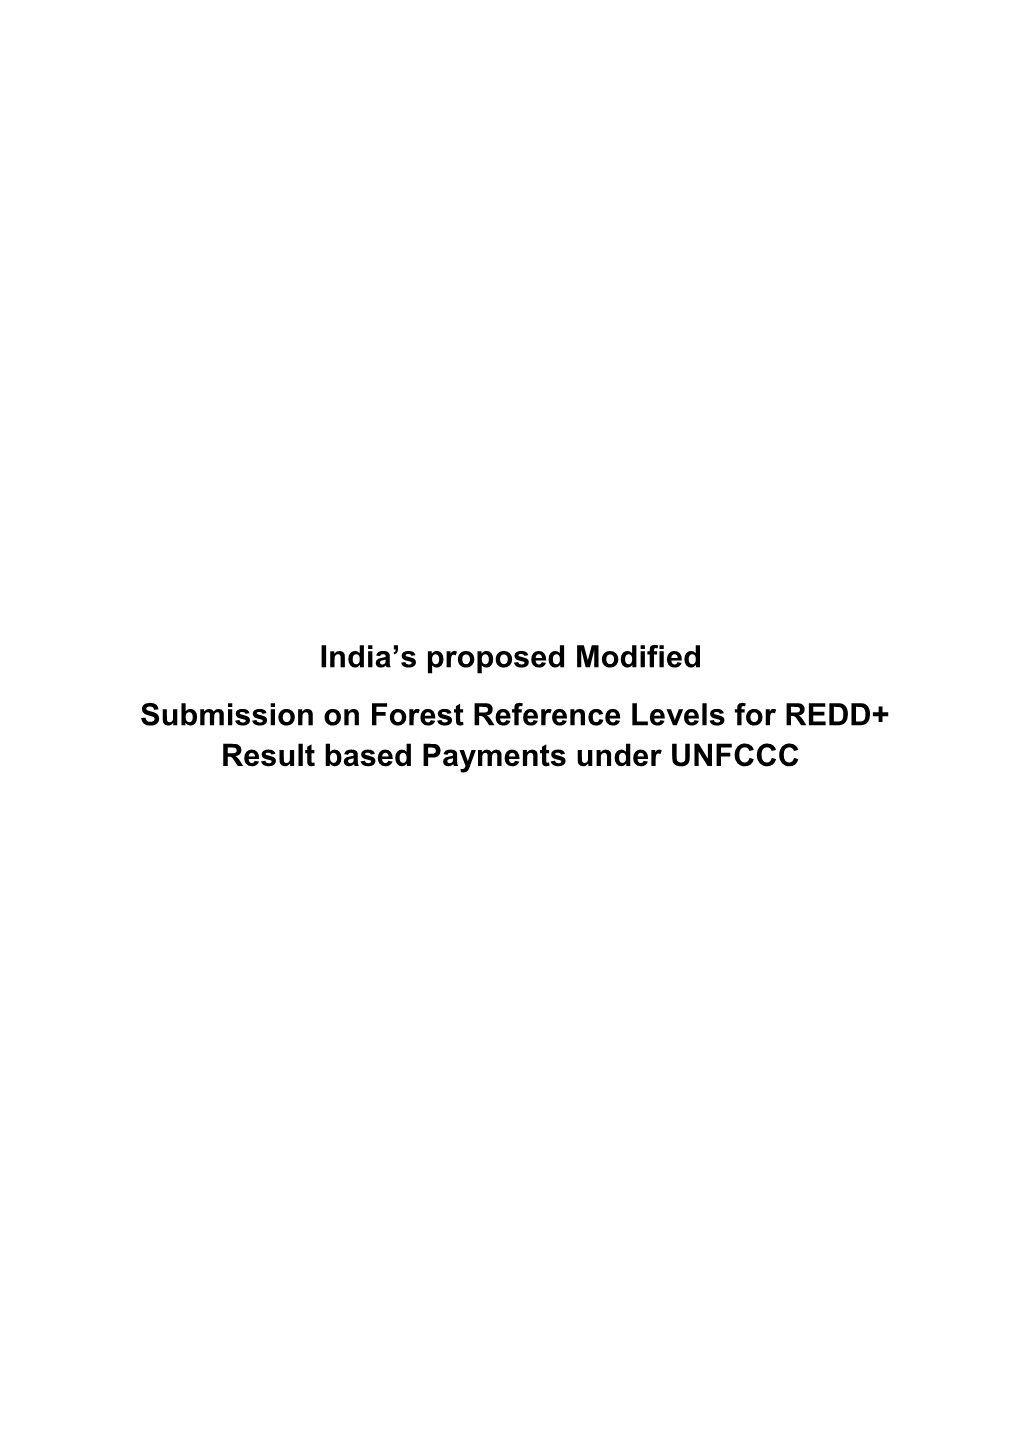 India's Proposed Modified Submission on Forest Reference Levels For